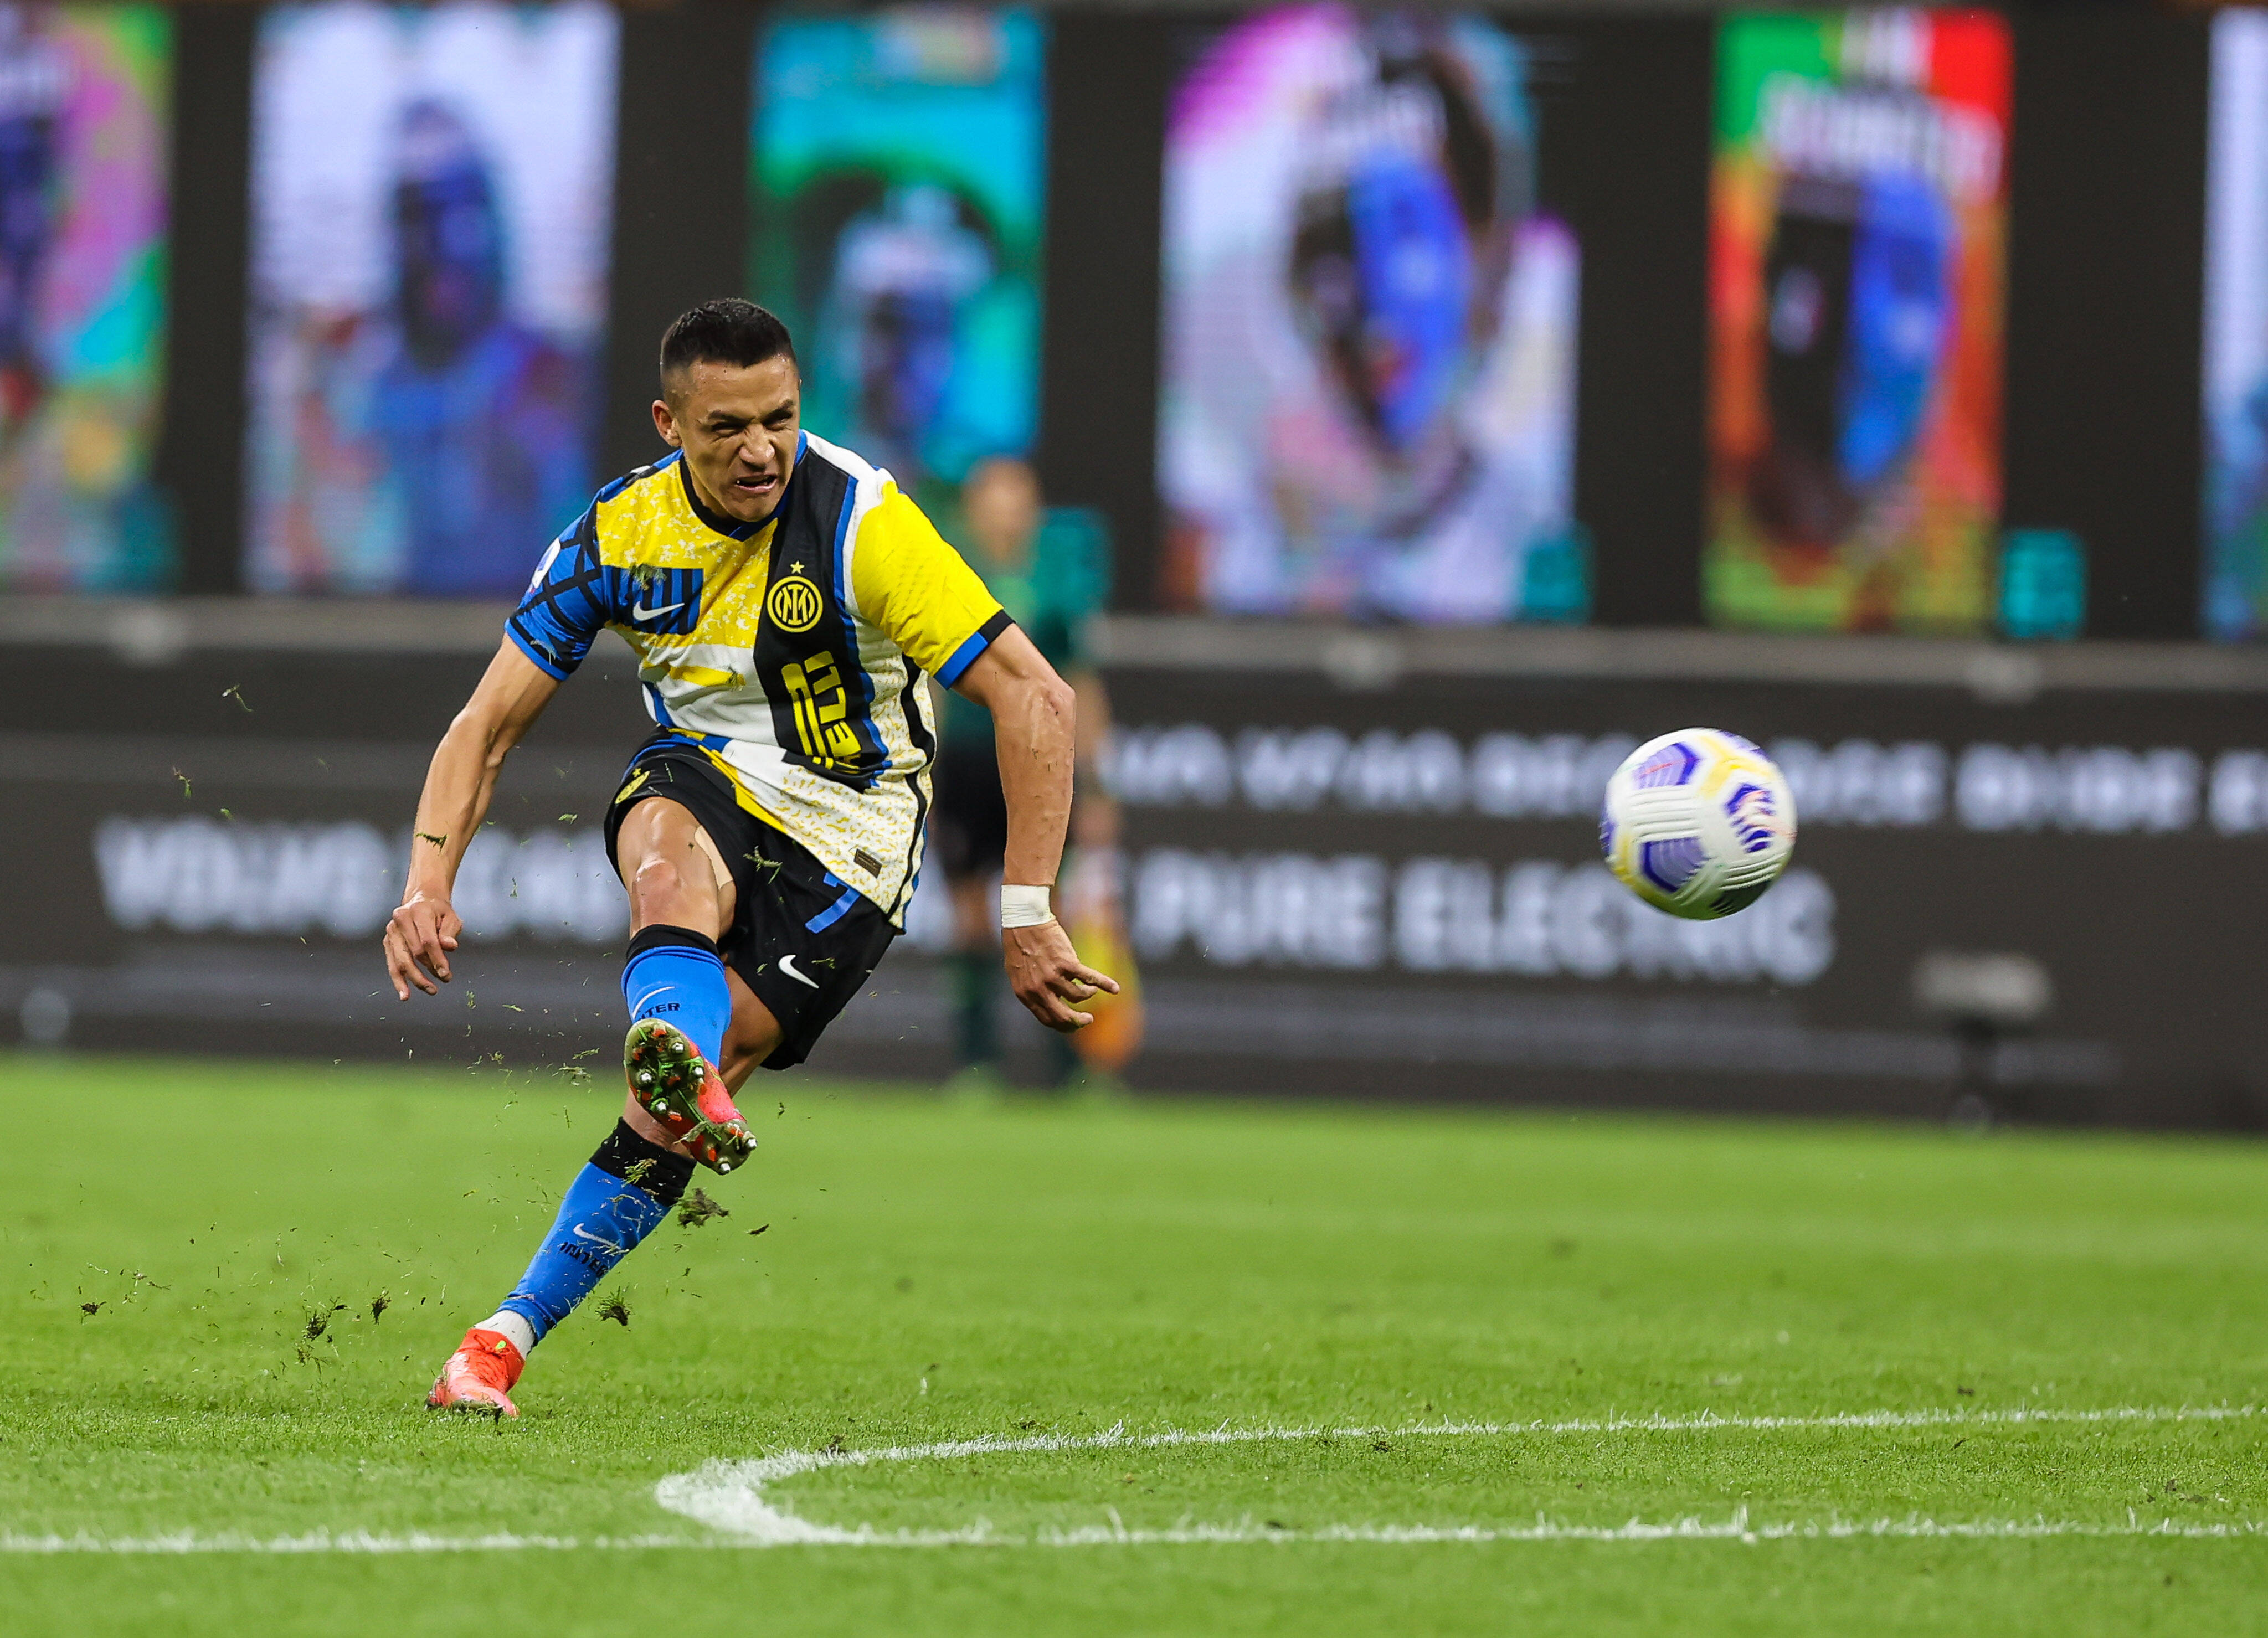 May 12, 2021, Milan, Italy: Alexis Sanchez Of Fc Internazionale Taking A Free Kick During The Serie A 2020/21 Football M